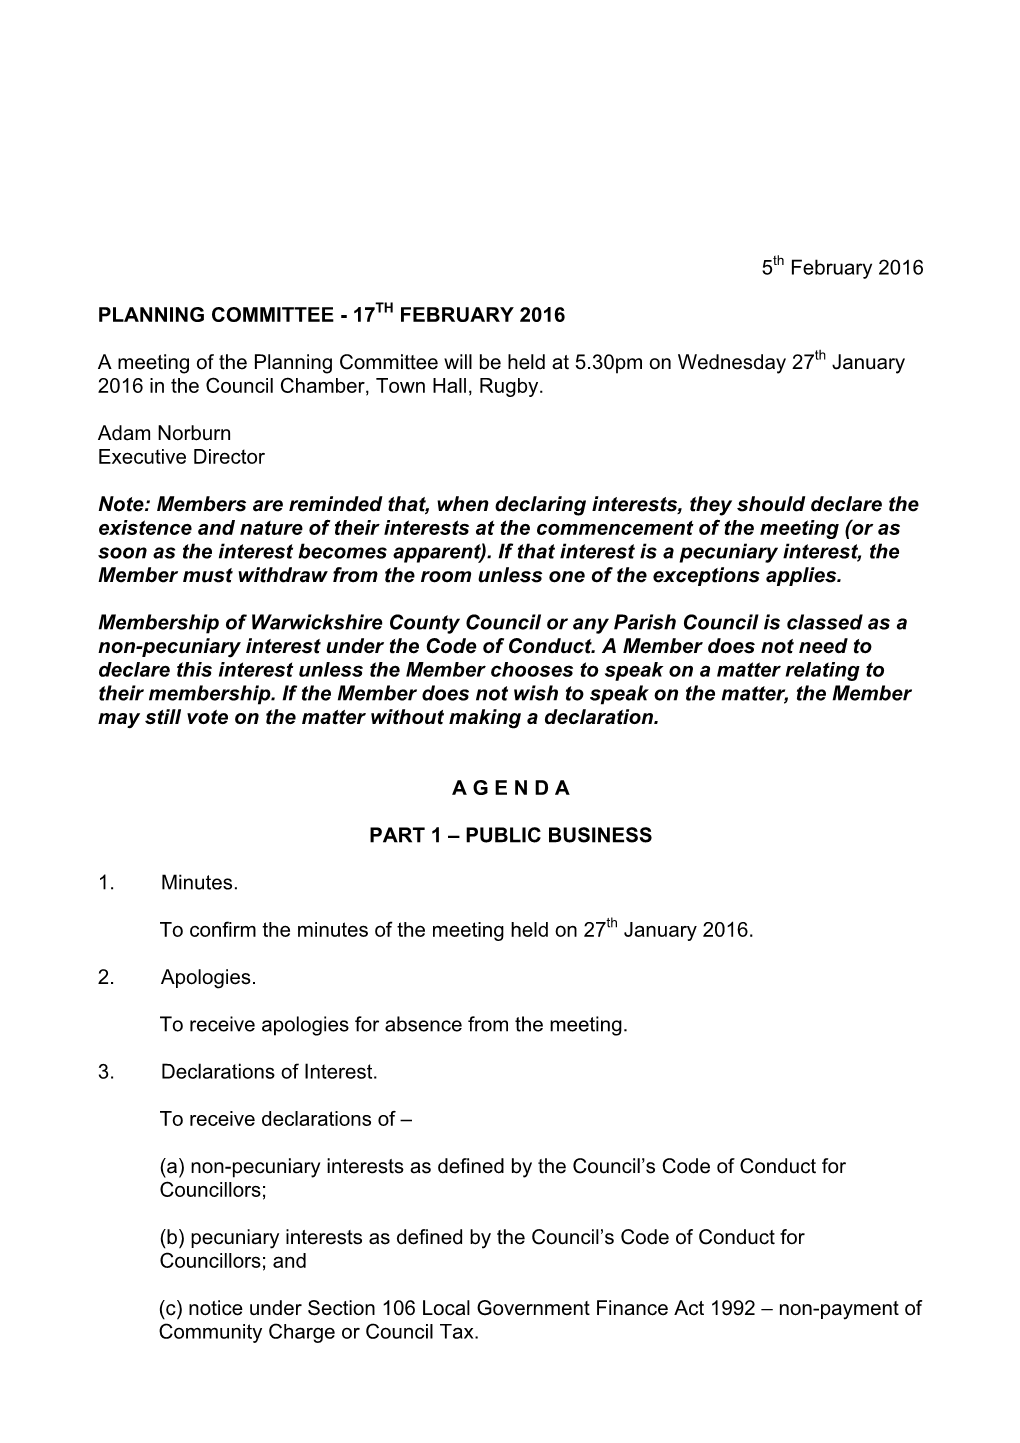 Planning Committee 17 February 2016 Agenda Part 1 Only